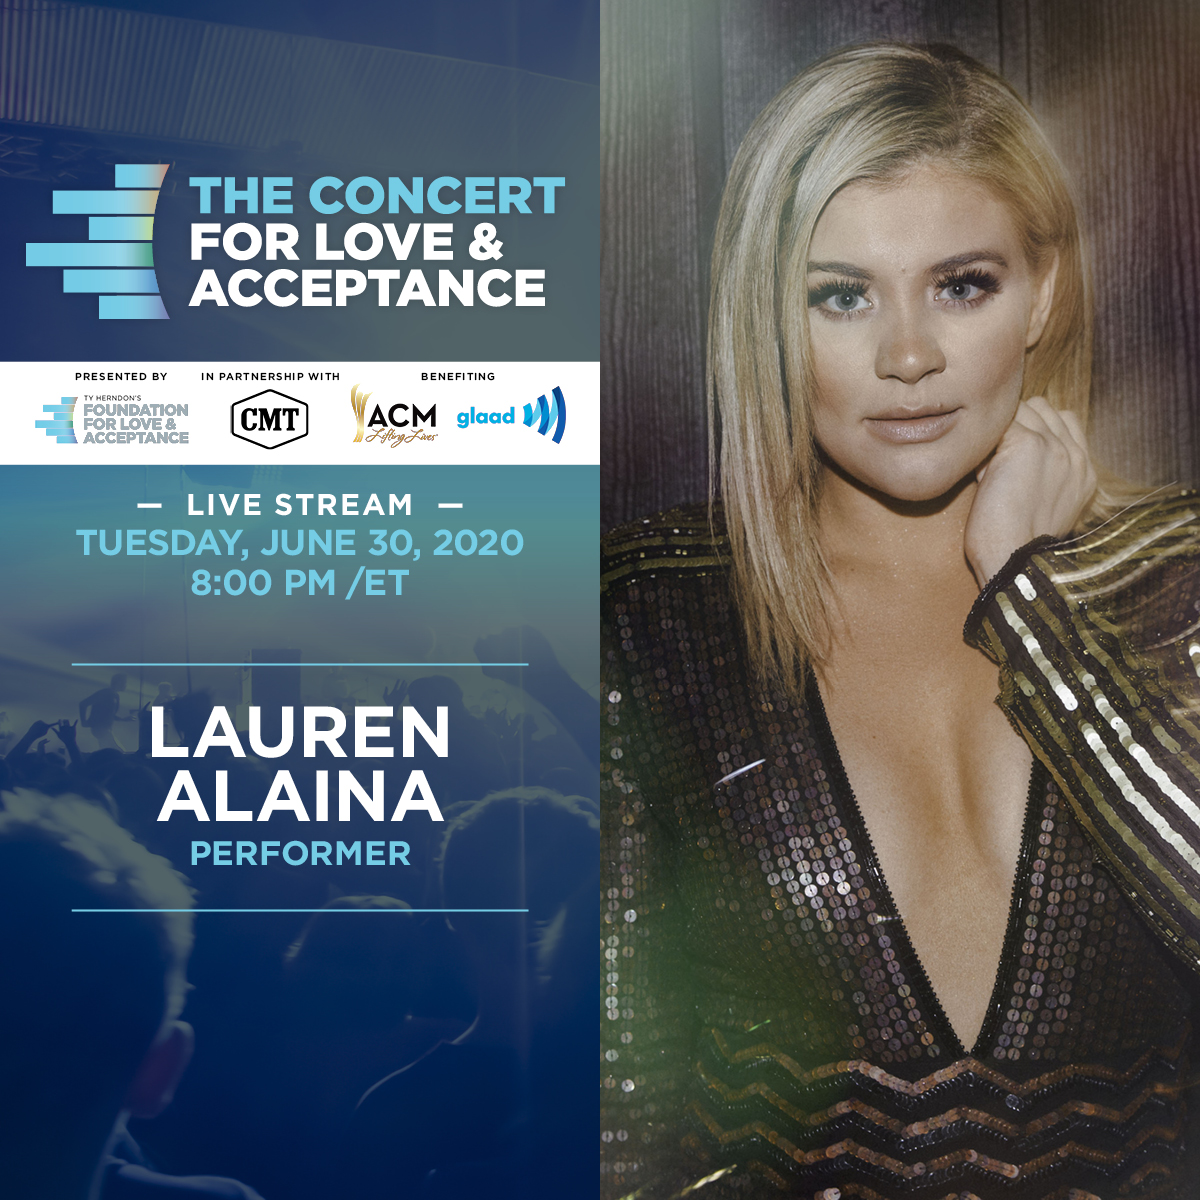 So excited to join @TyHerndoncom @CodyAlan  @KChenoweth and so many more for the upcoming Concert for Love & Acceptance. We’re raising donations to support #ACMLiftingLives & @glaad. Tune in on June 30 and show your support: F4LA.org -Team LA